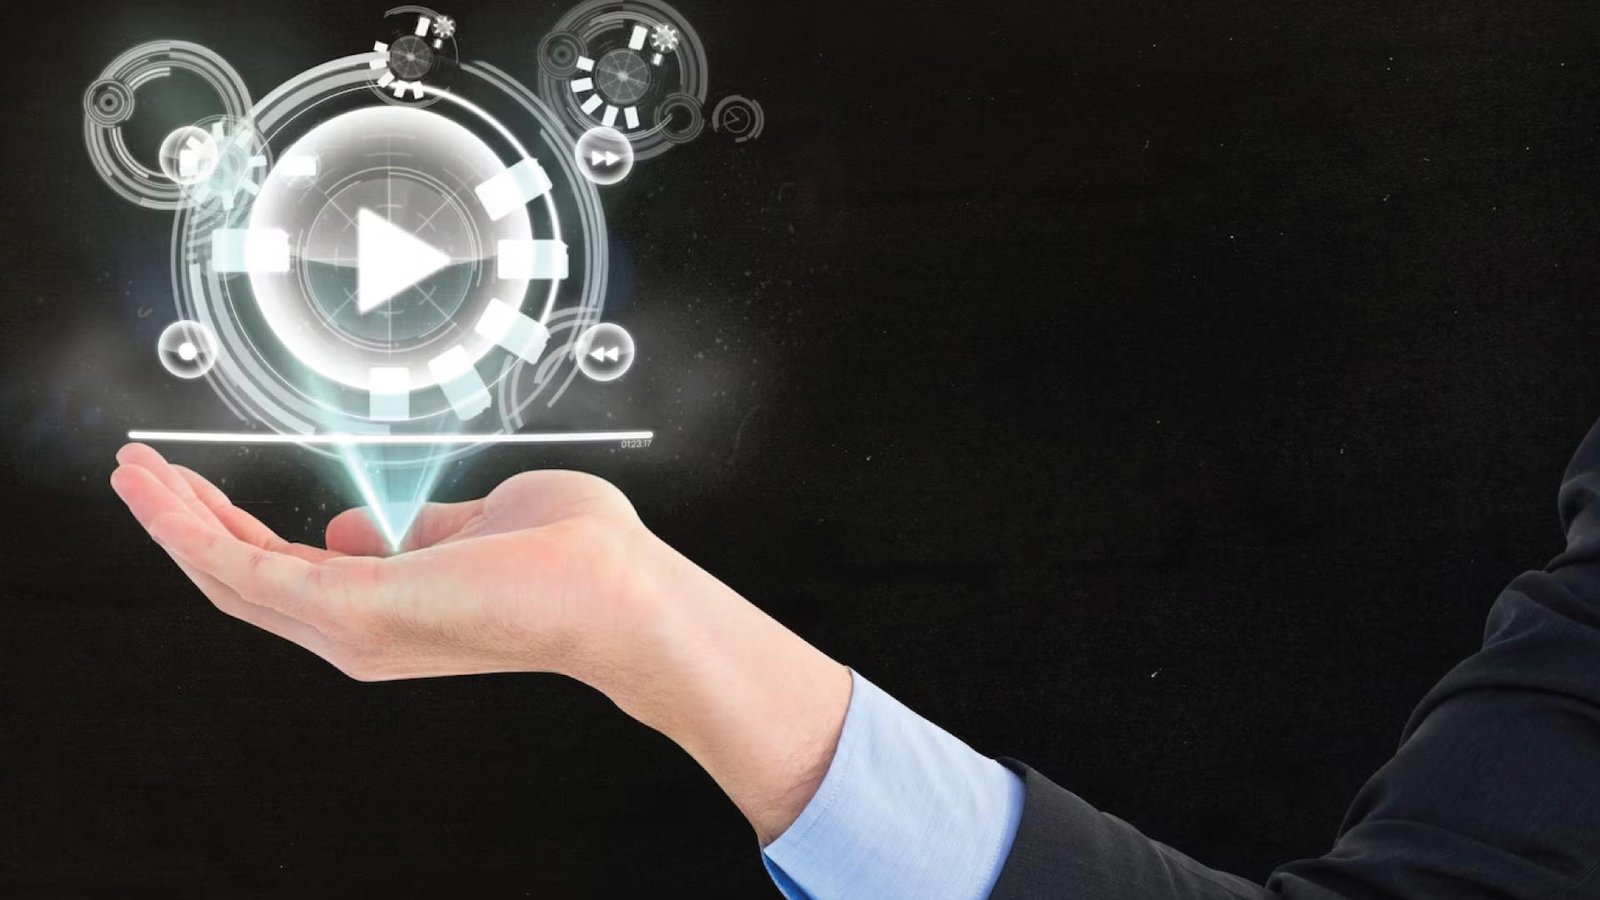 Brightcove selected to Power Acquia’s Video Marketing Strategy